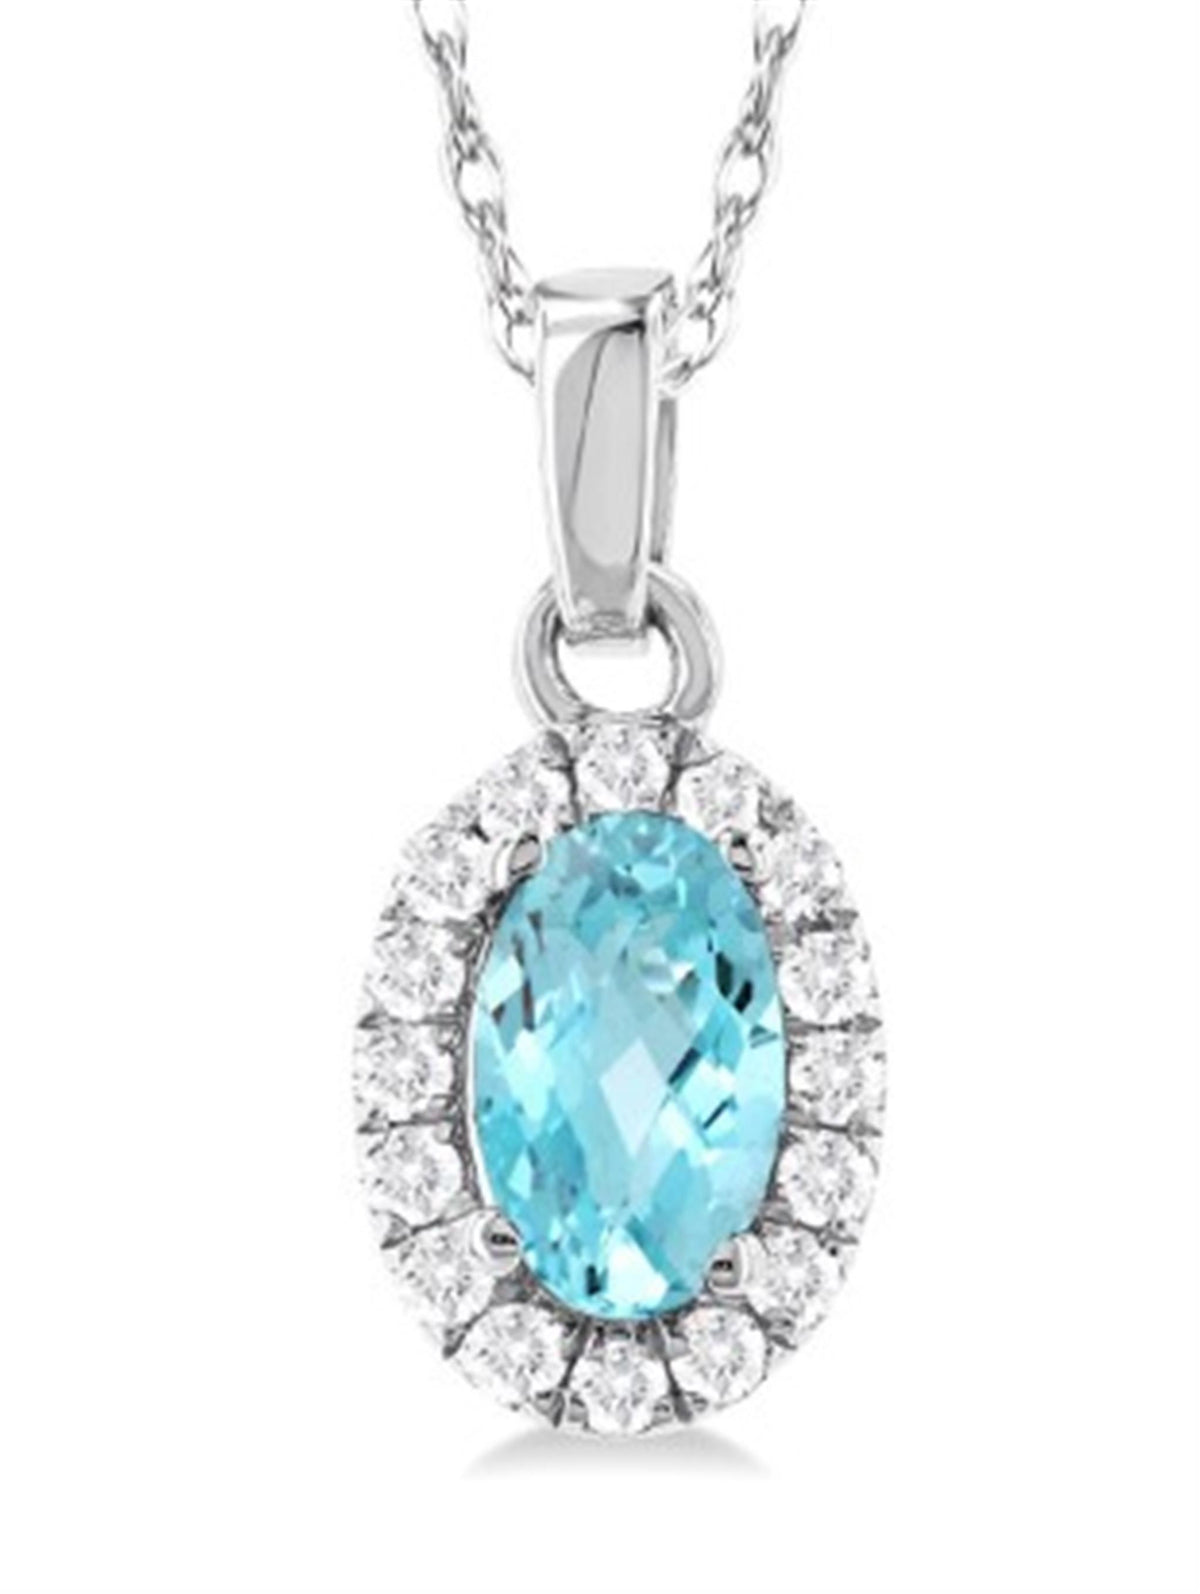 10Kt White Gold Center Of My World Halo Pendant With Aquamarine and Natural Diamonds